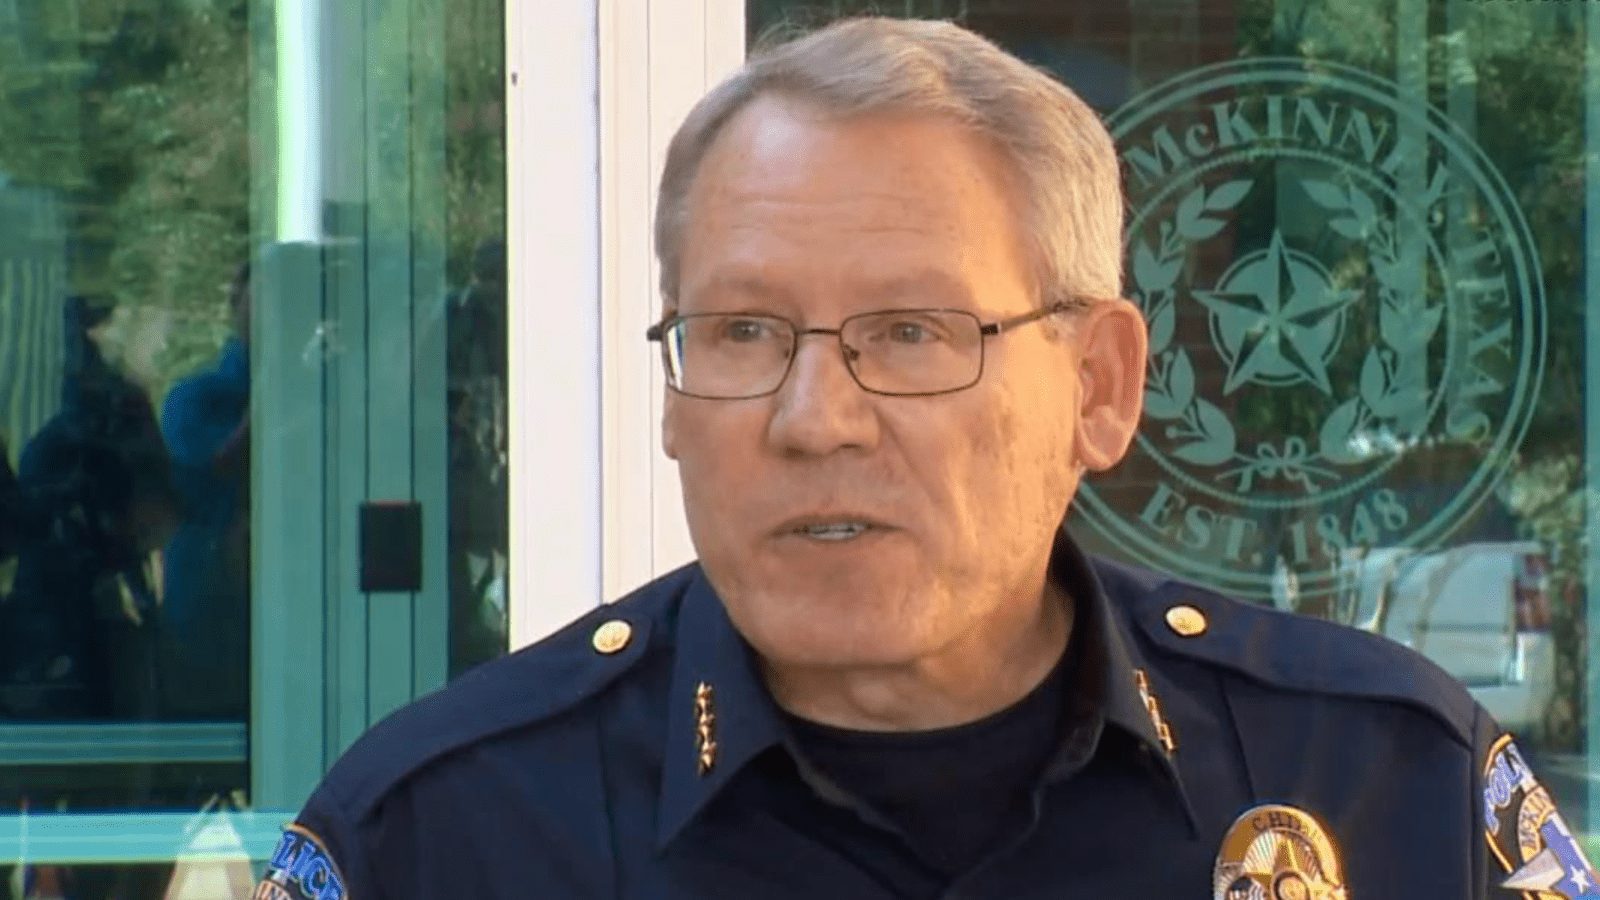 Local City Loses Police Chief, Gains Director of Public Safety